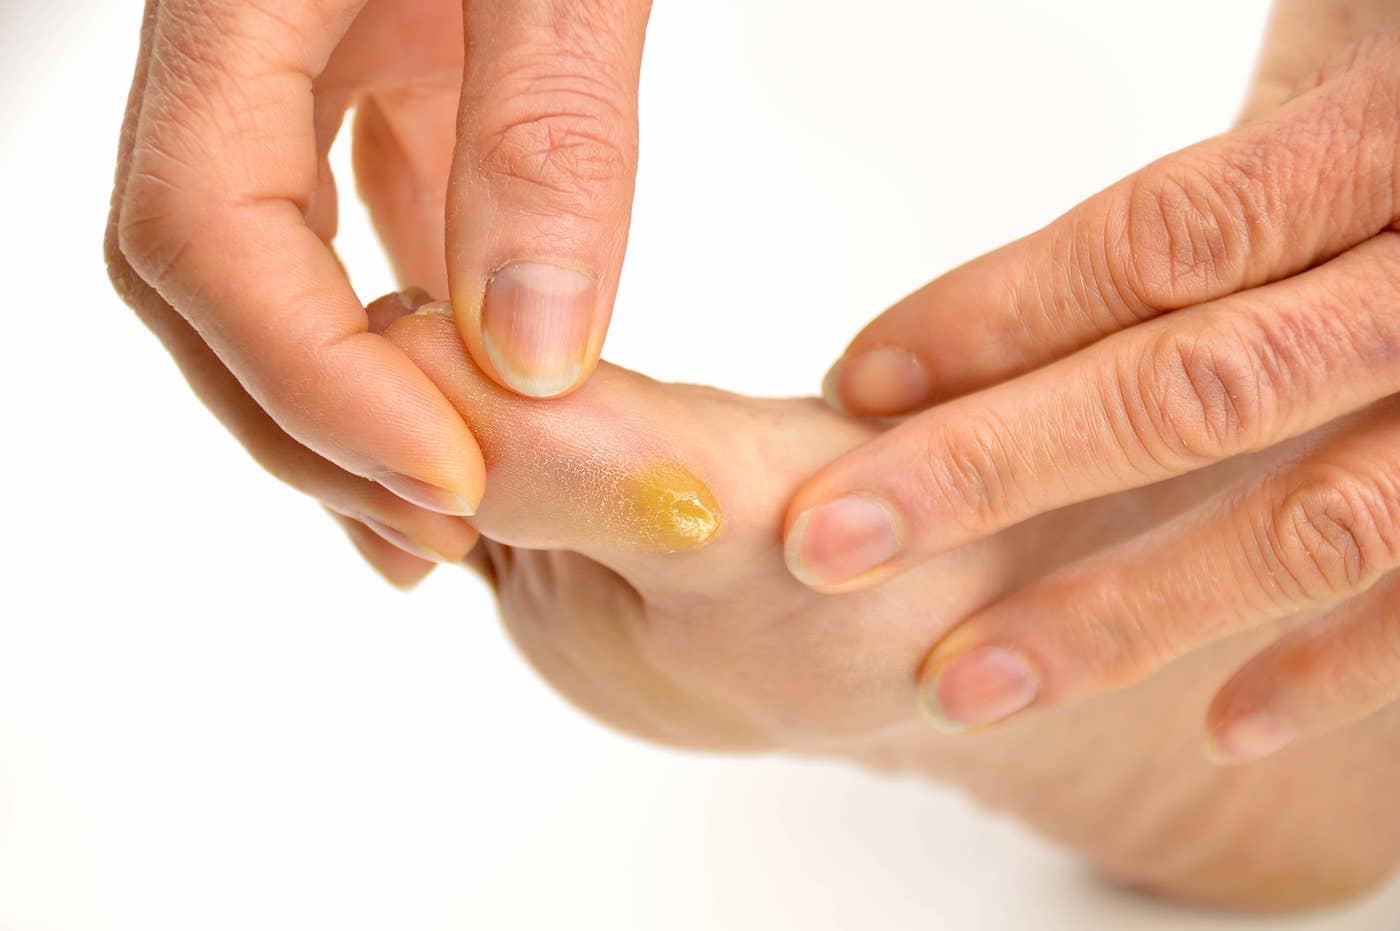 How to Take Care of Your Calluses